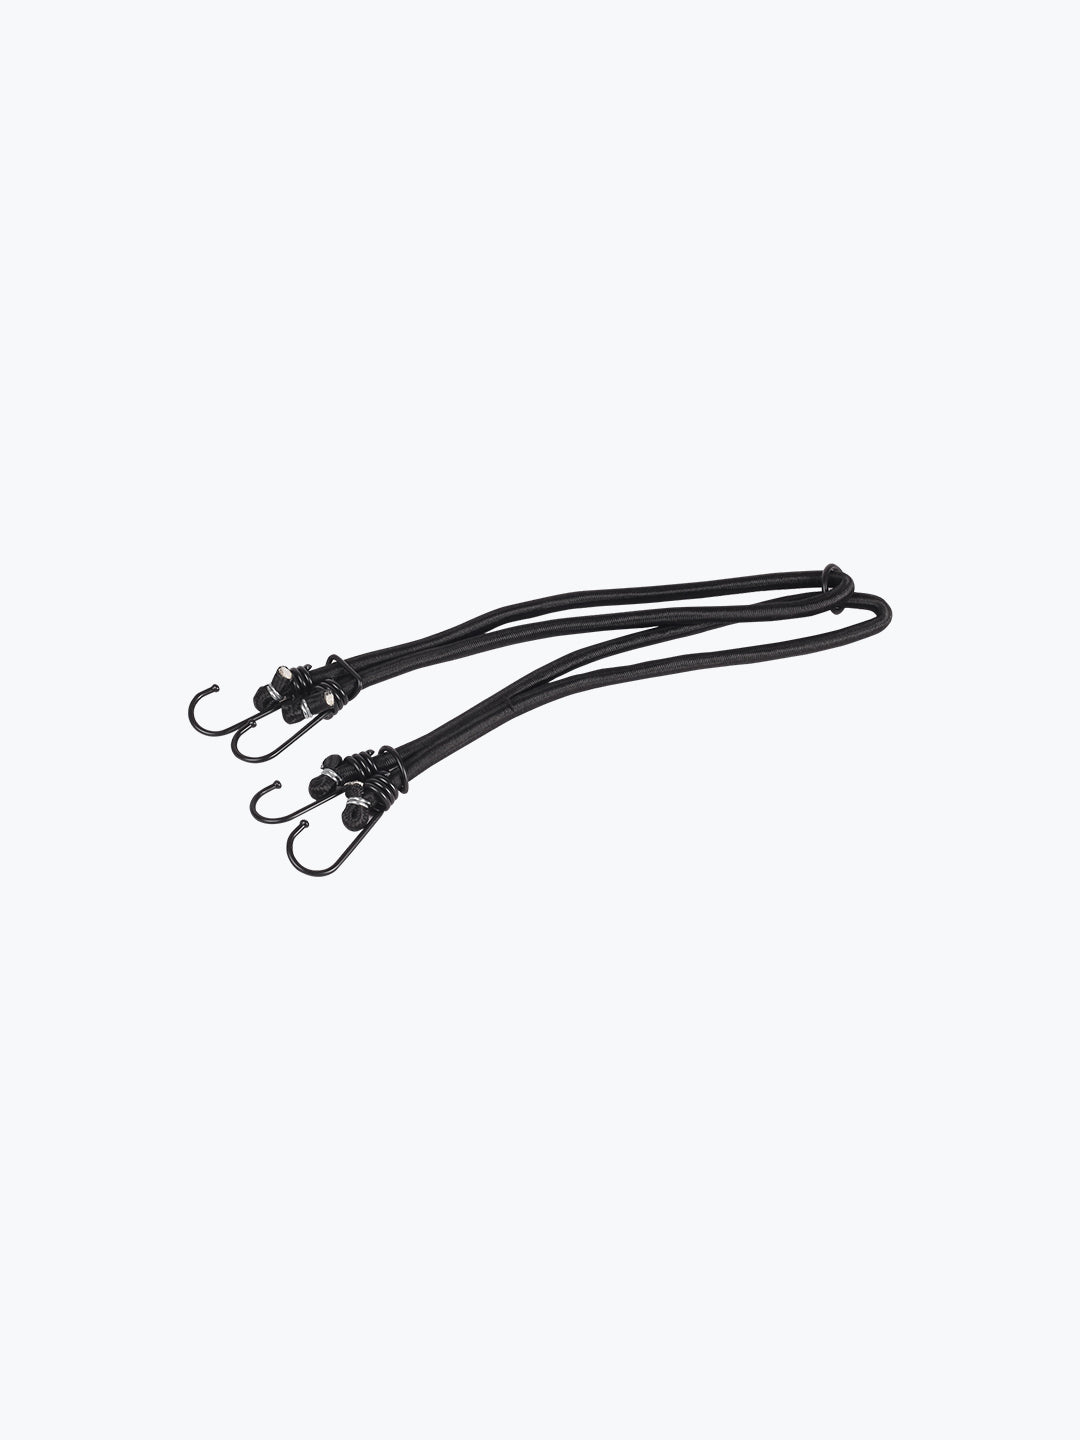 4 Pin Bungee Cord Imported Black